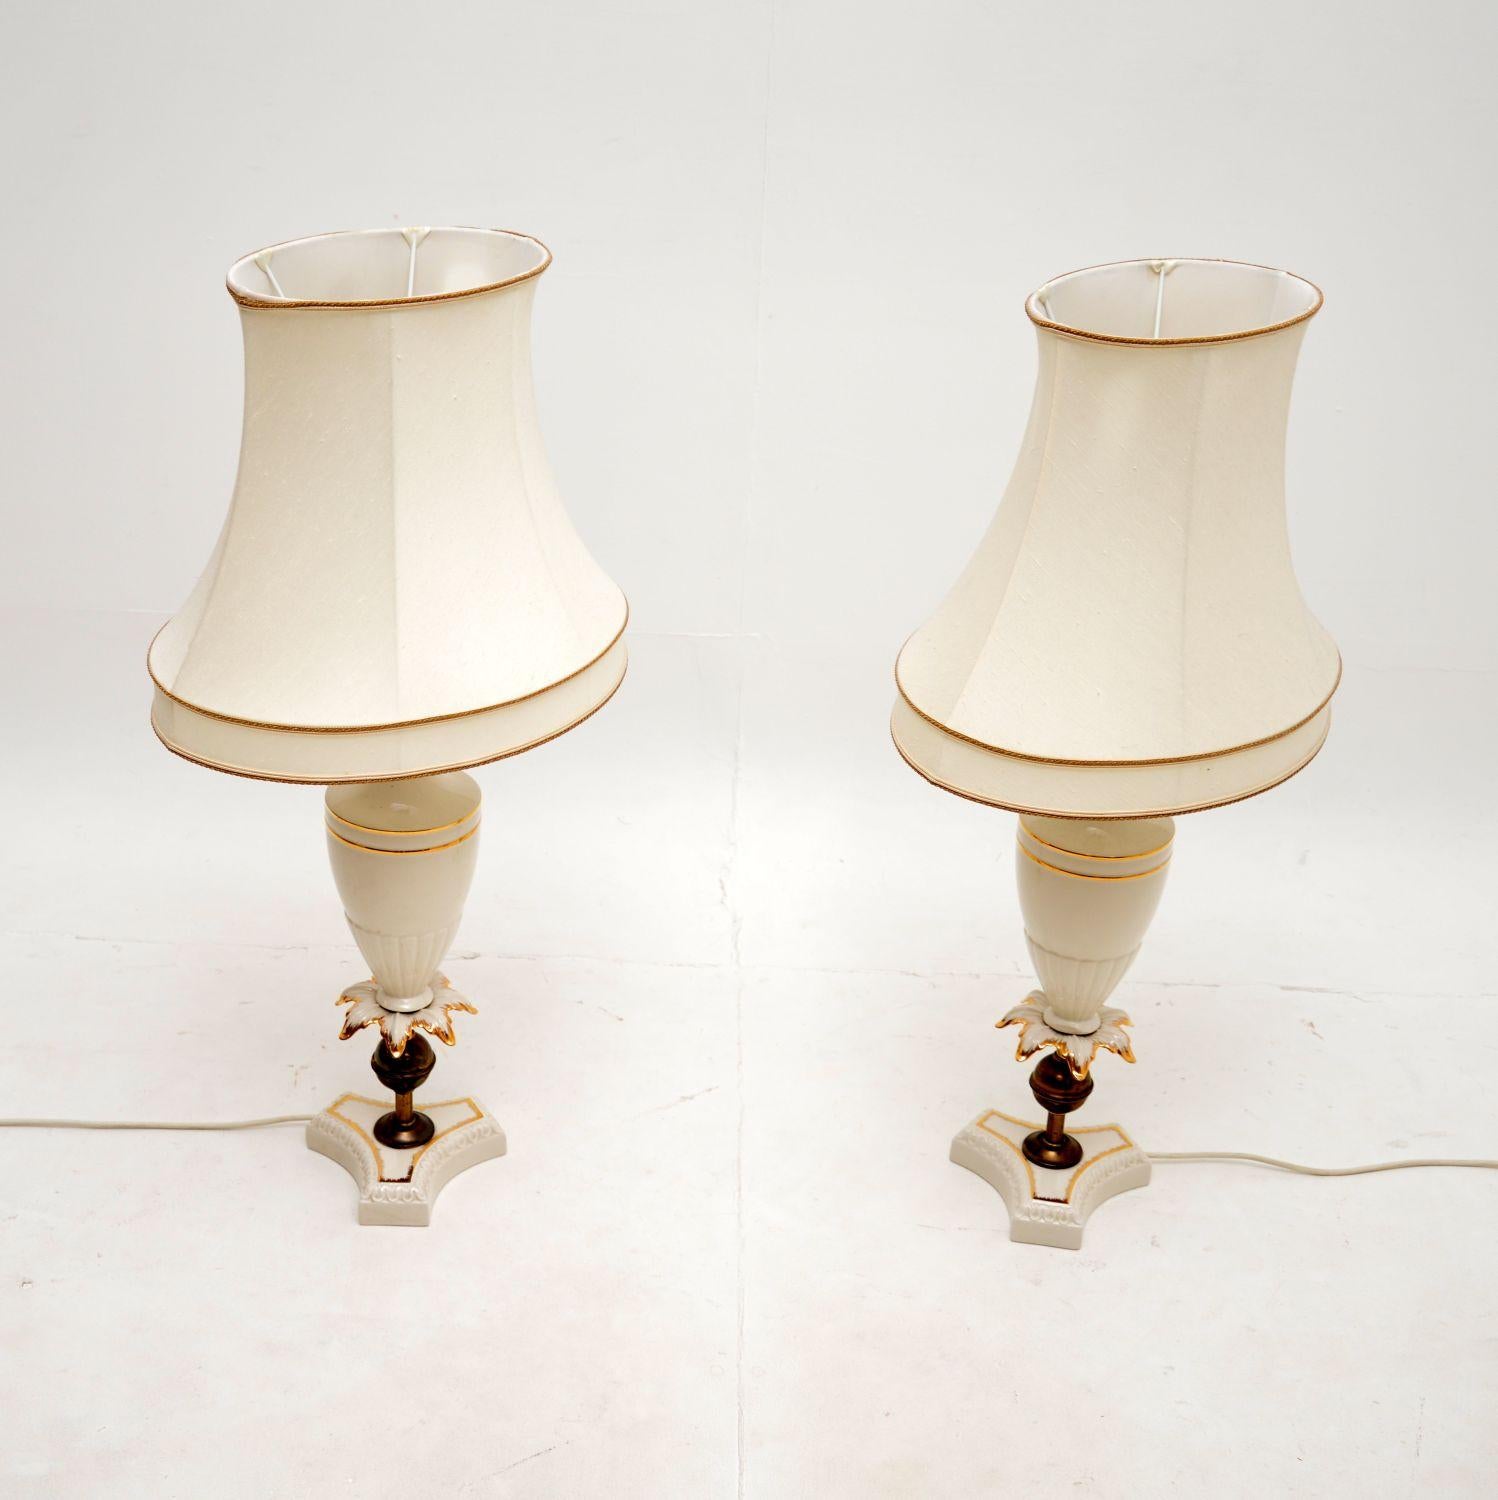 Pair of Antique Italian Ceramic Table Lamps In Good Condition For Sale In London, GB